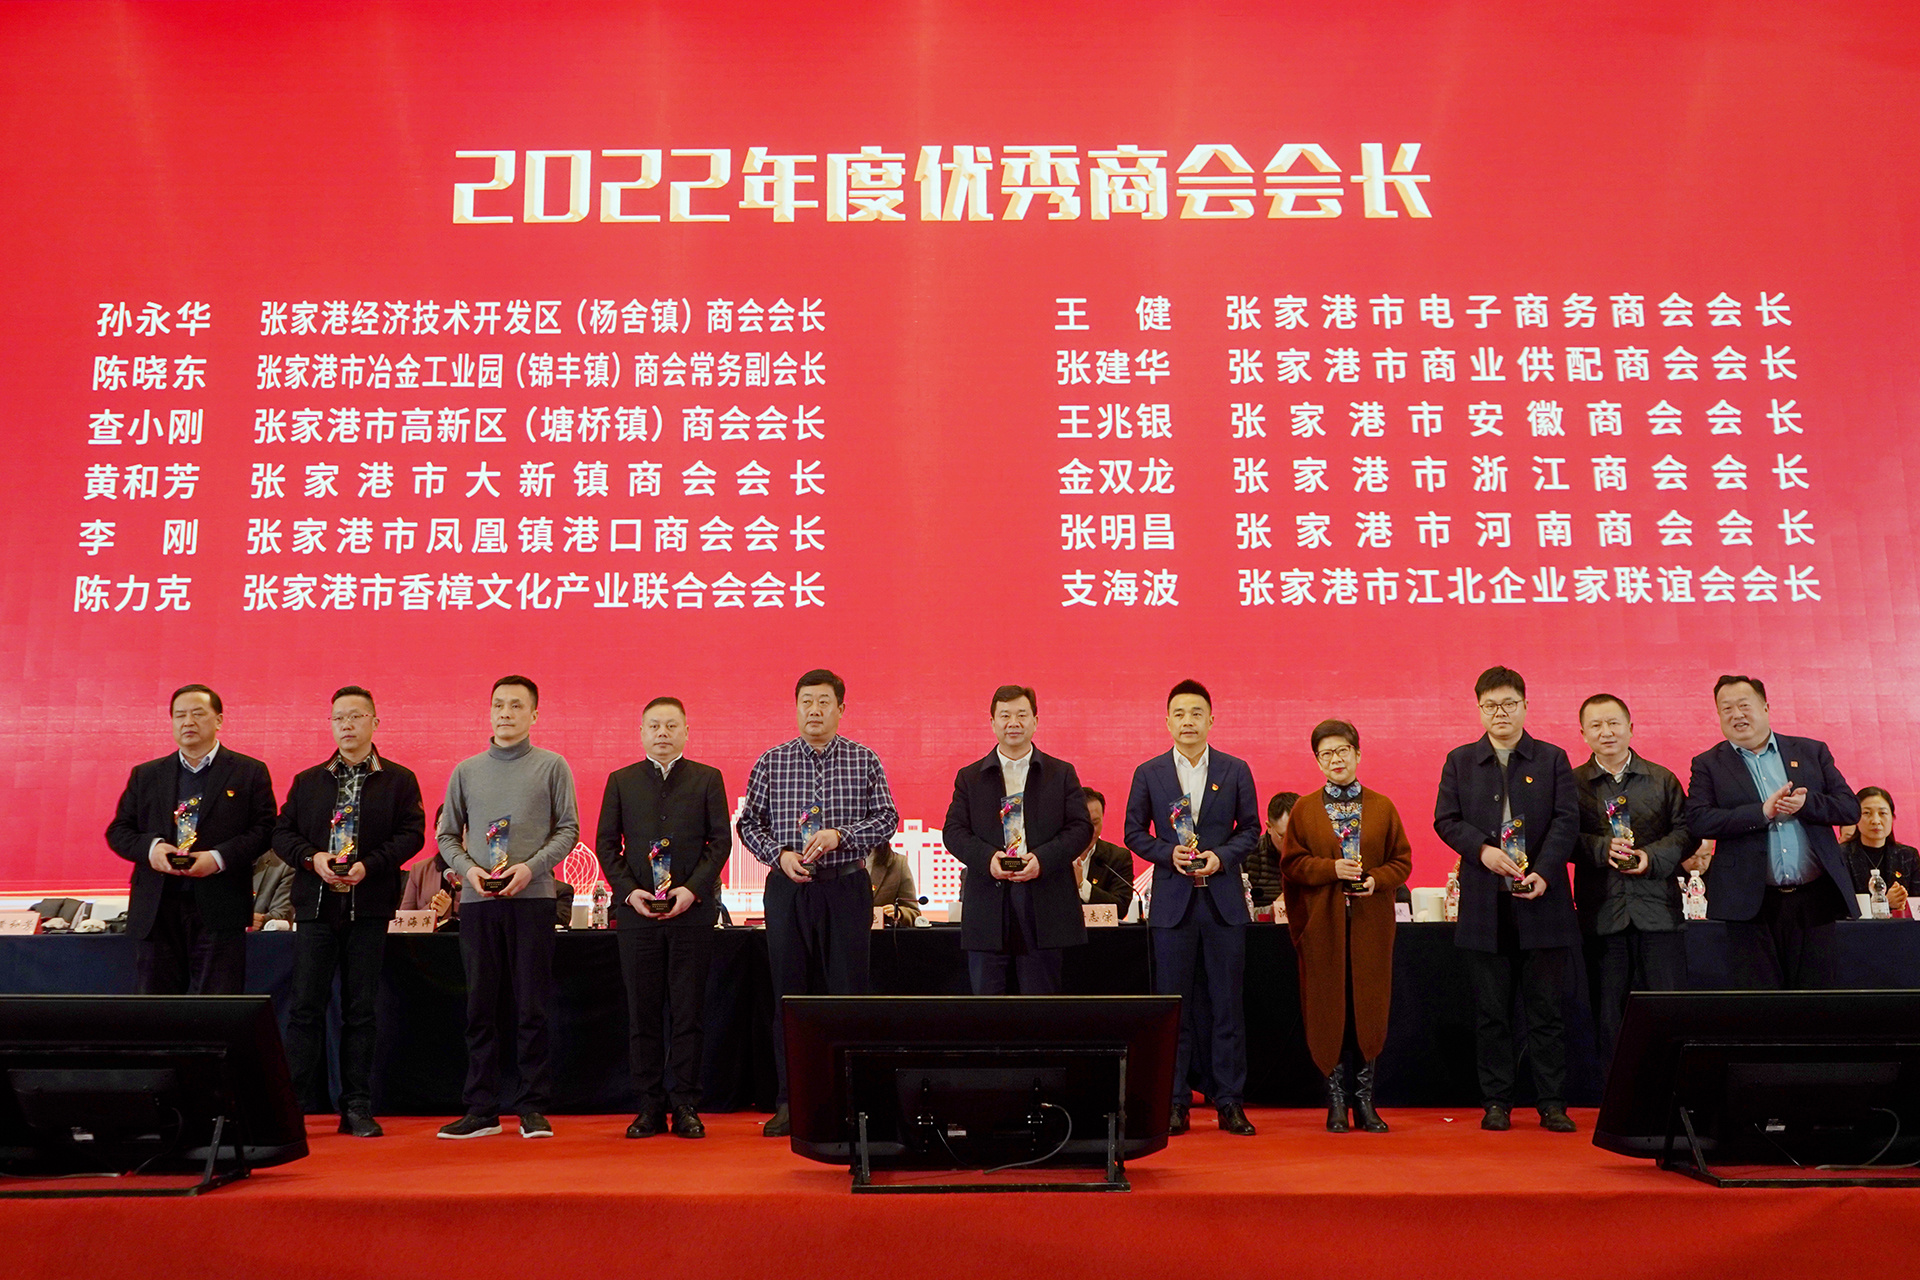 On the afternoon of February 10, 2023, the Municipal Federation of Industry and Commerce held the second executive committee meeting of the 11th session, and Huang Hefang, president of Daxin Chamber of Commerce, was awarded the honorary title of 